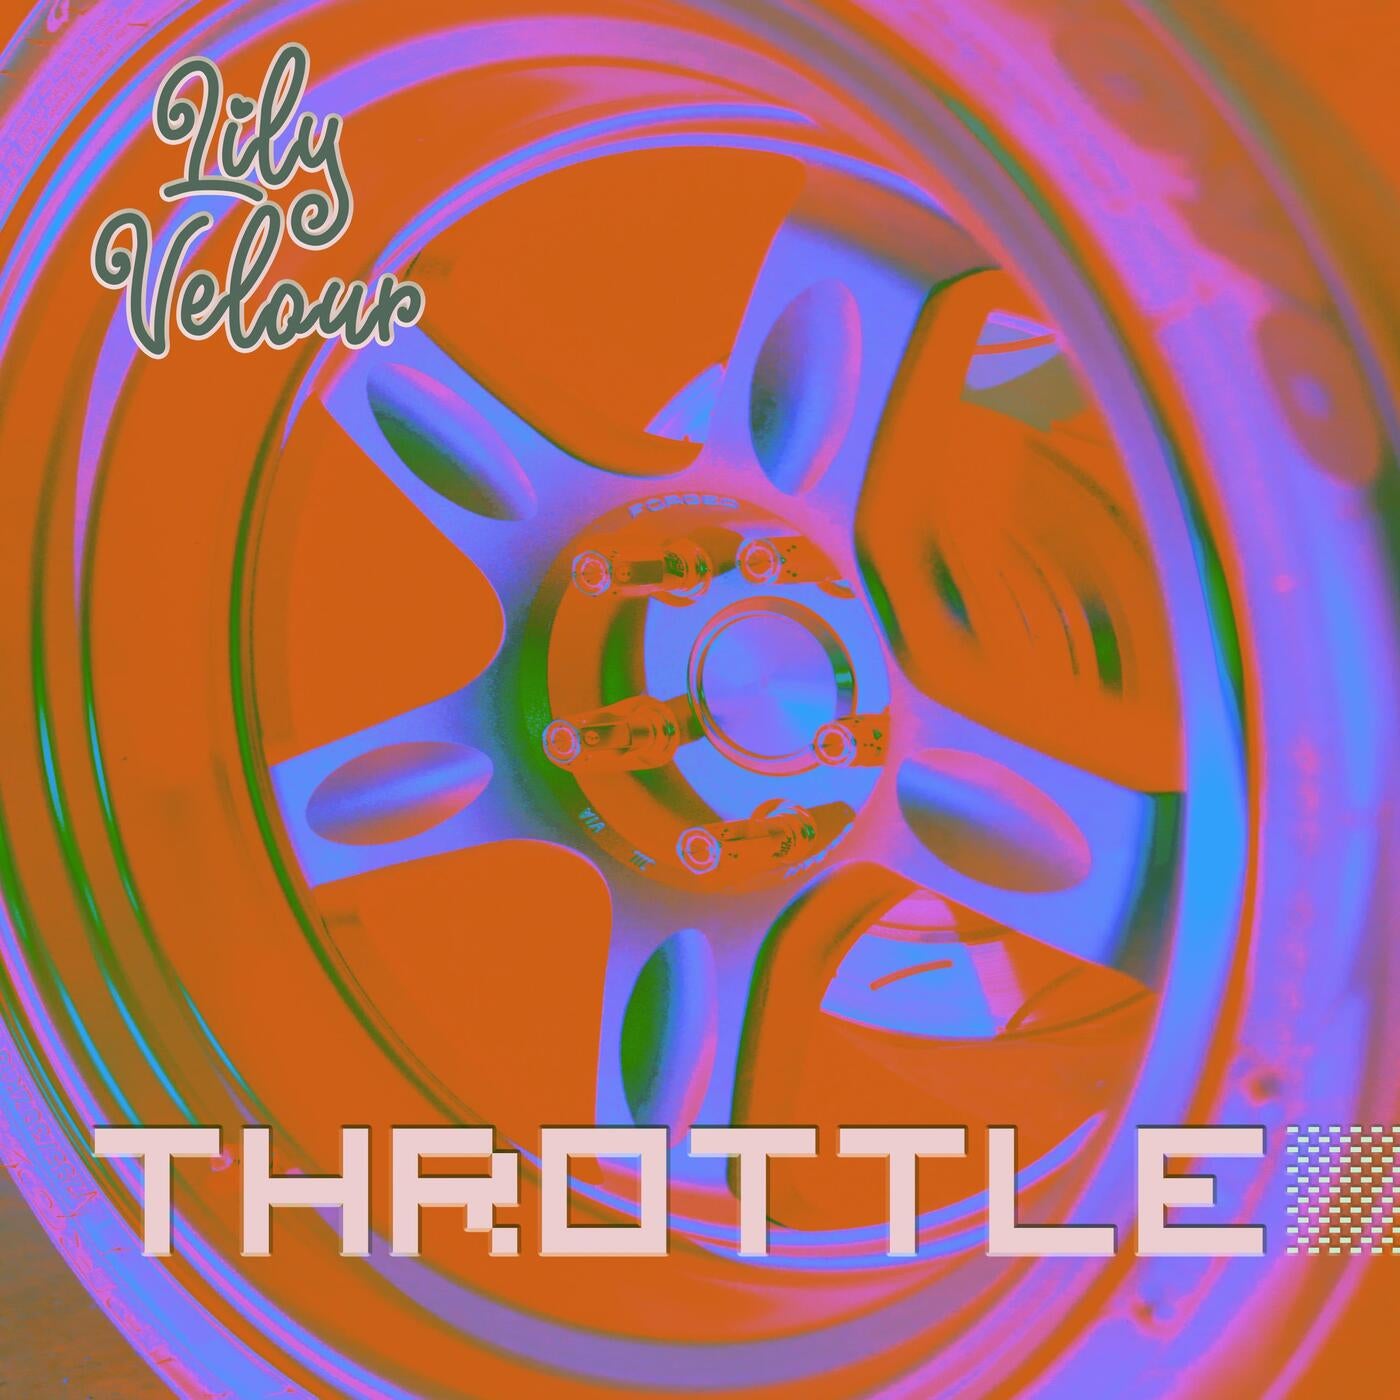 Throttle (Extended Mix)